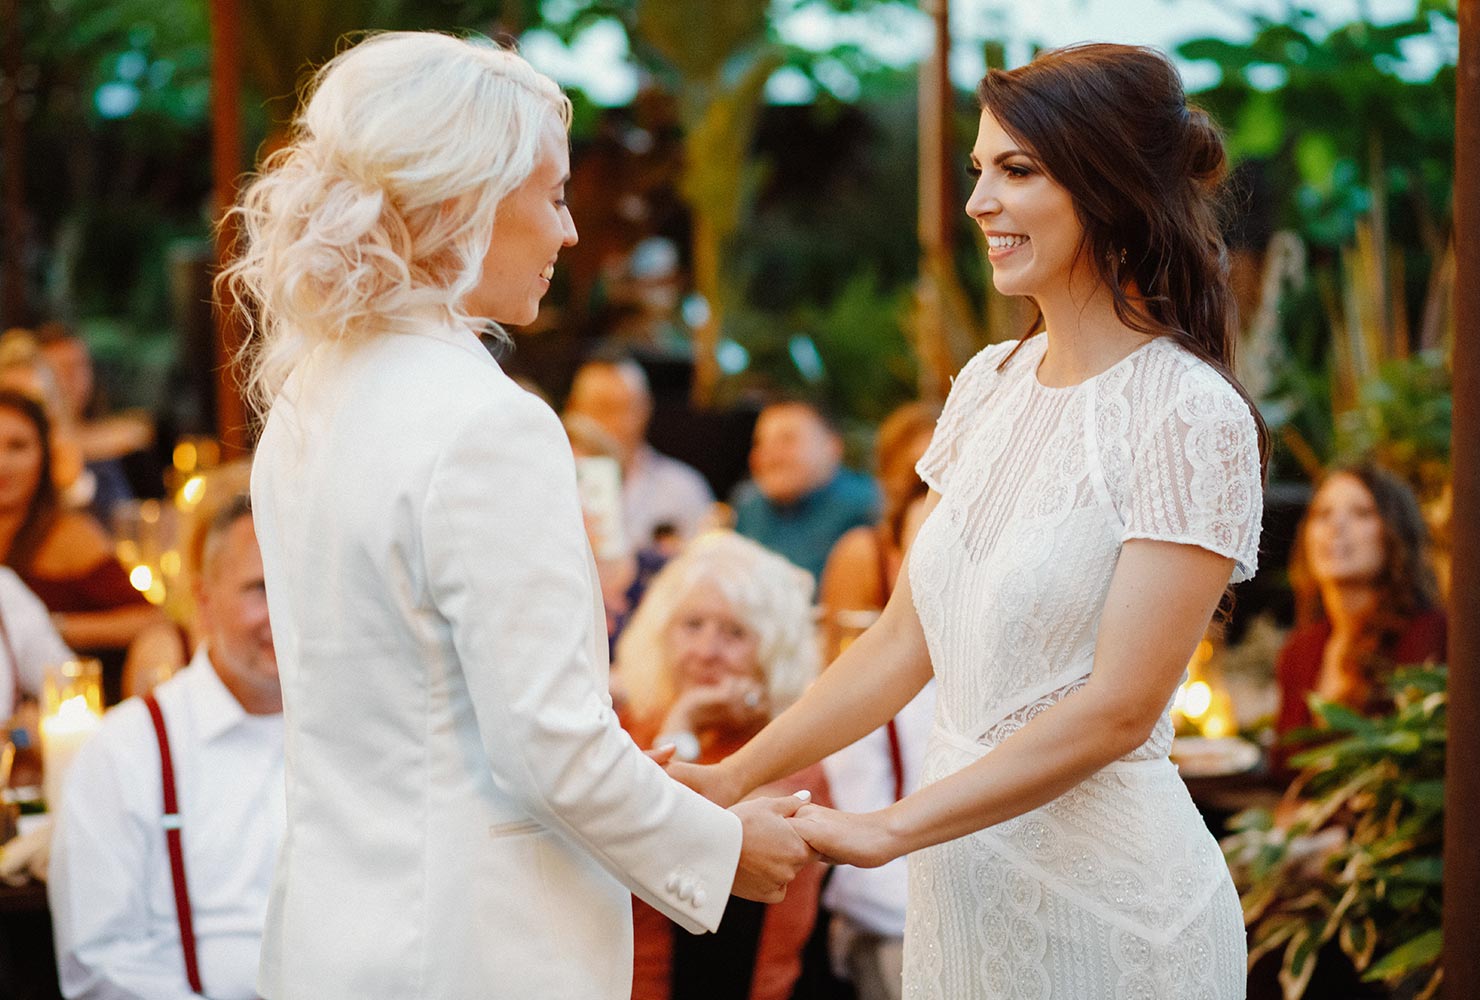 Two brides smiling and holding hands at wedding